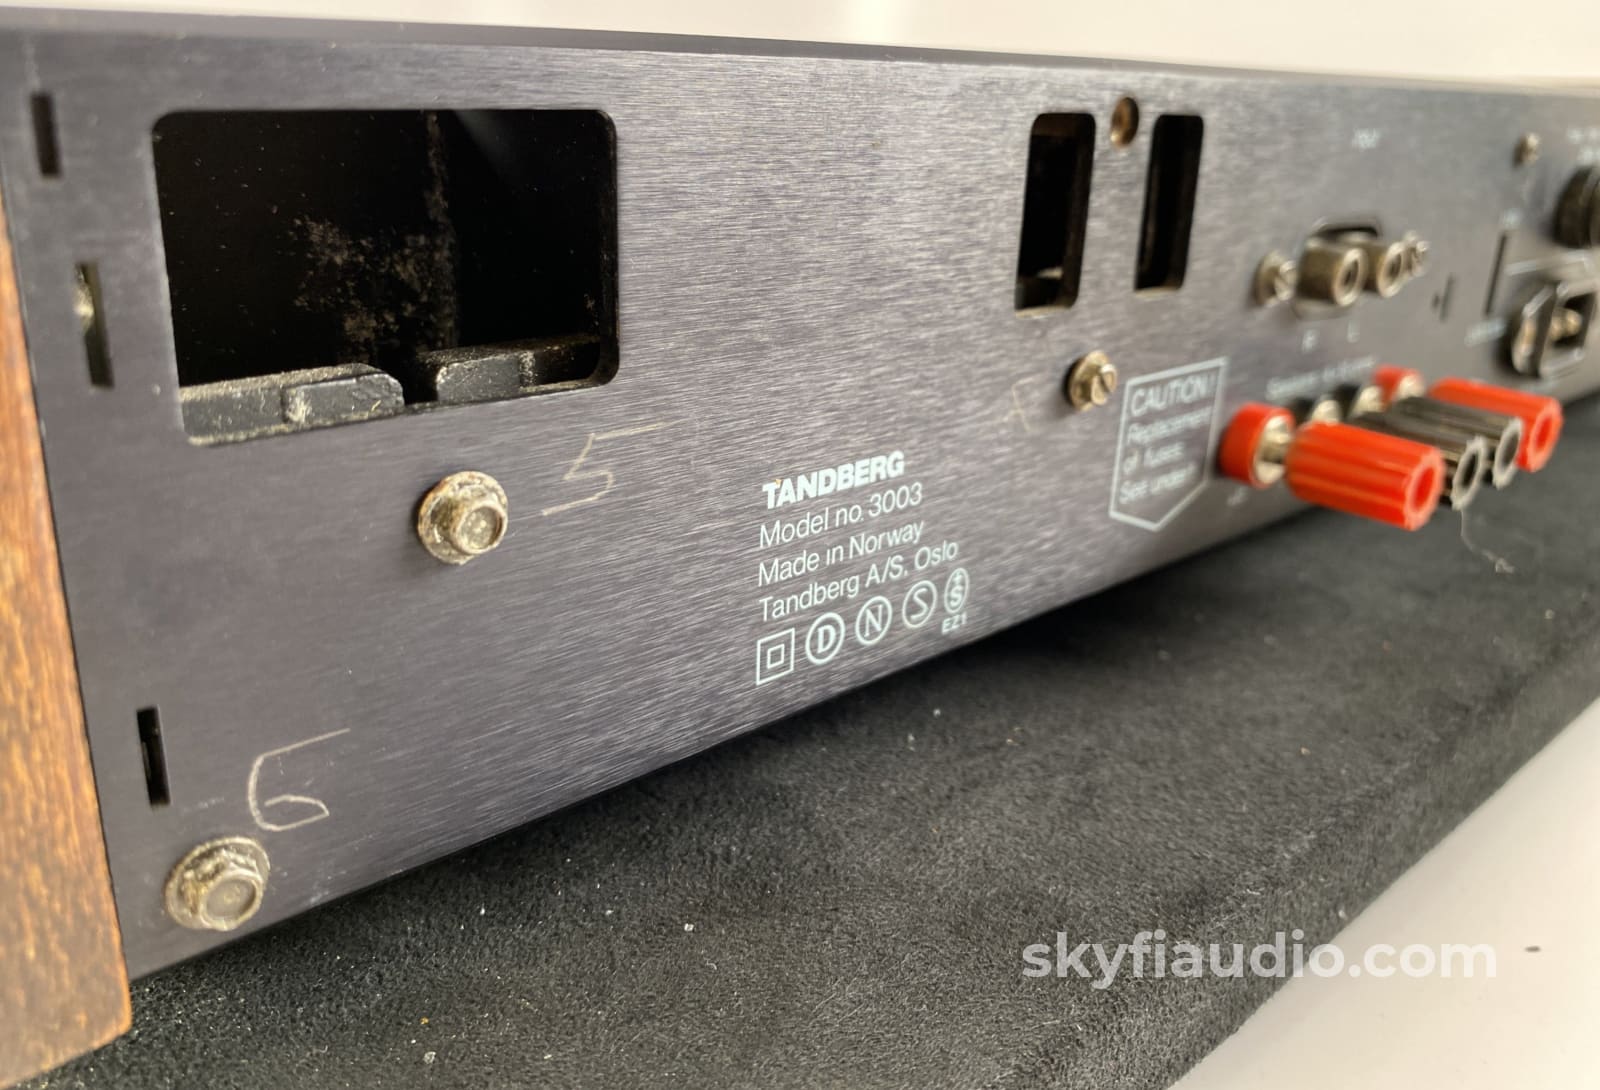 Tandberg 3003 A Stereo Amplifier Made In Norway